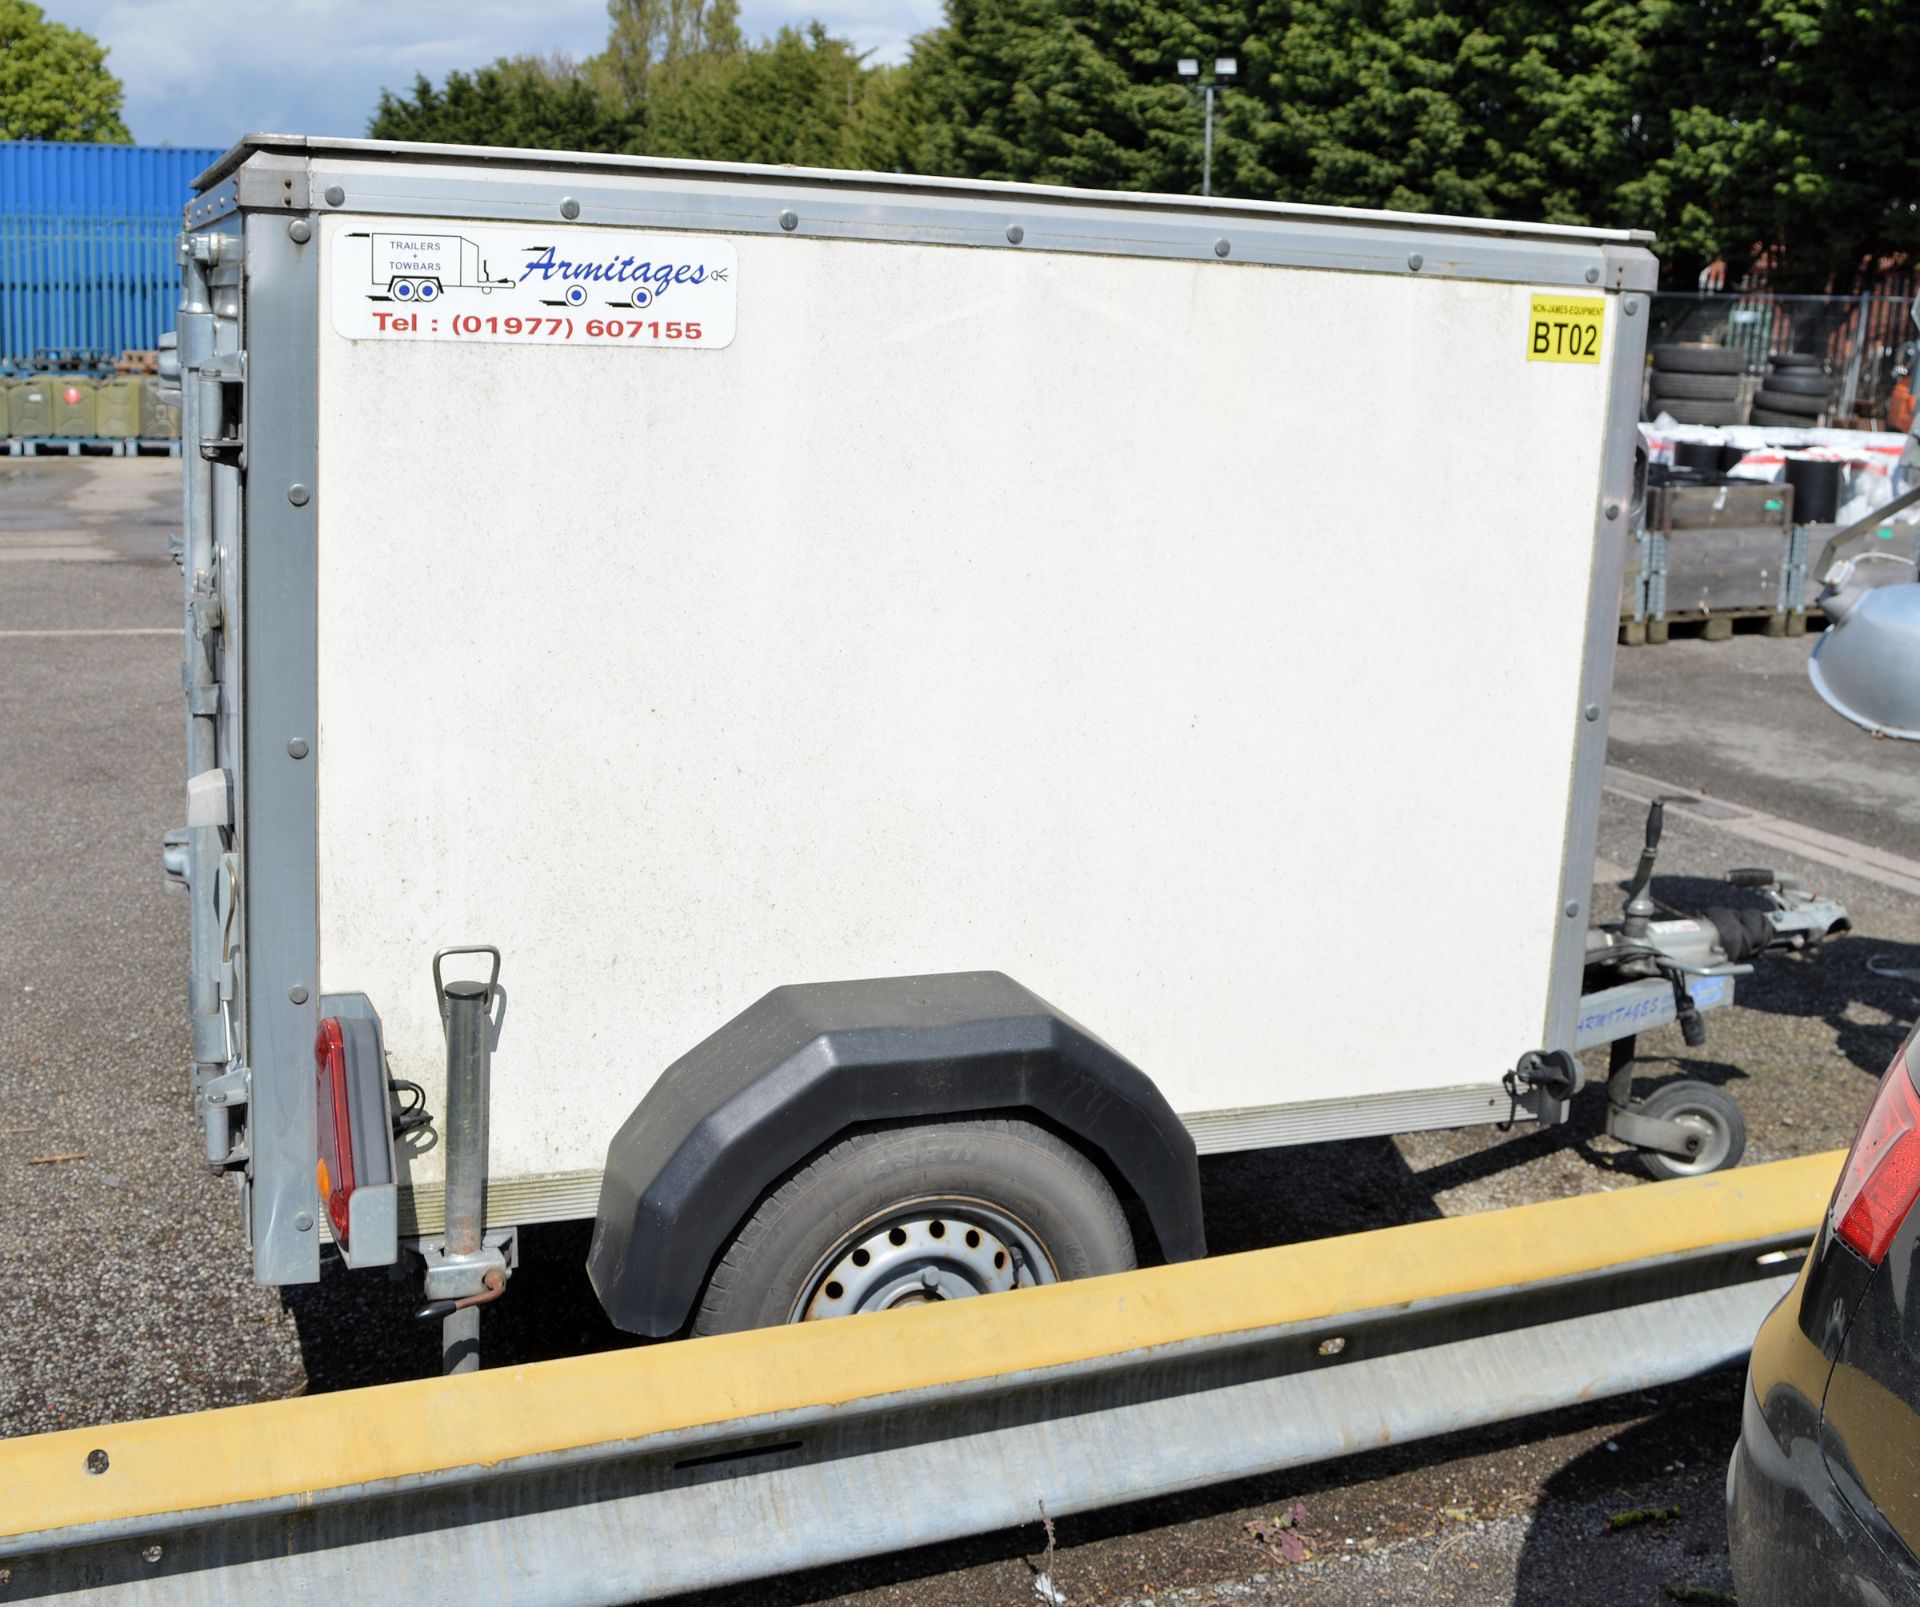 Armitages Box Trailer L 3000mm x W 1700mm x H 1660mm - double door - box section - L 1800m - Image 4 of 10